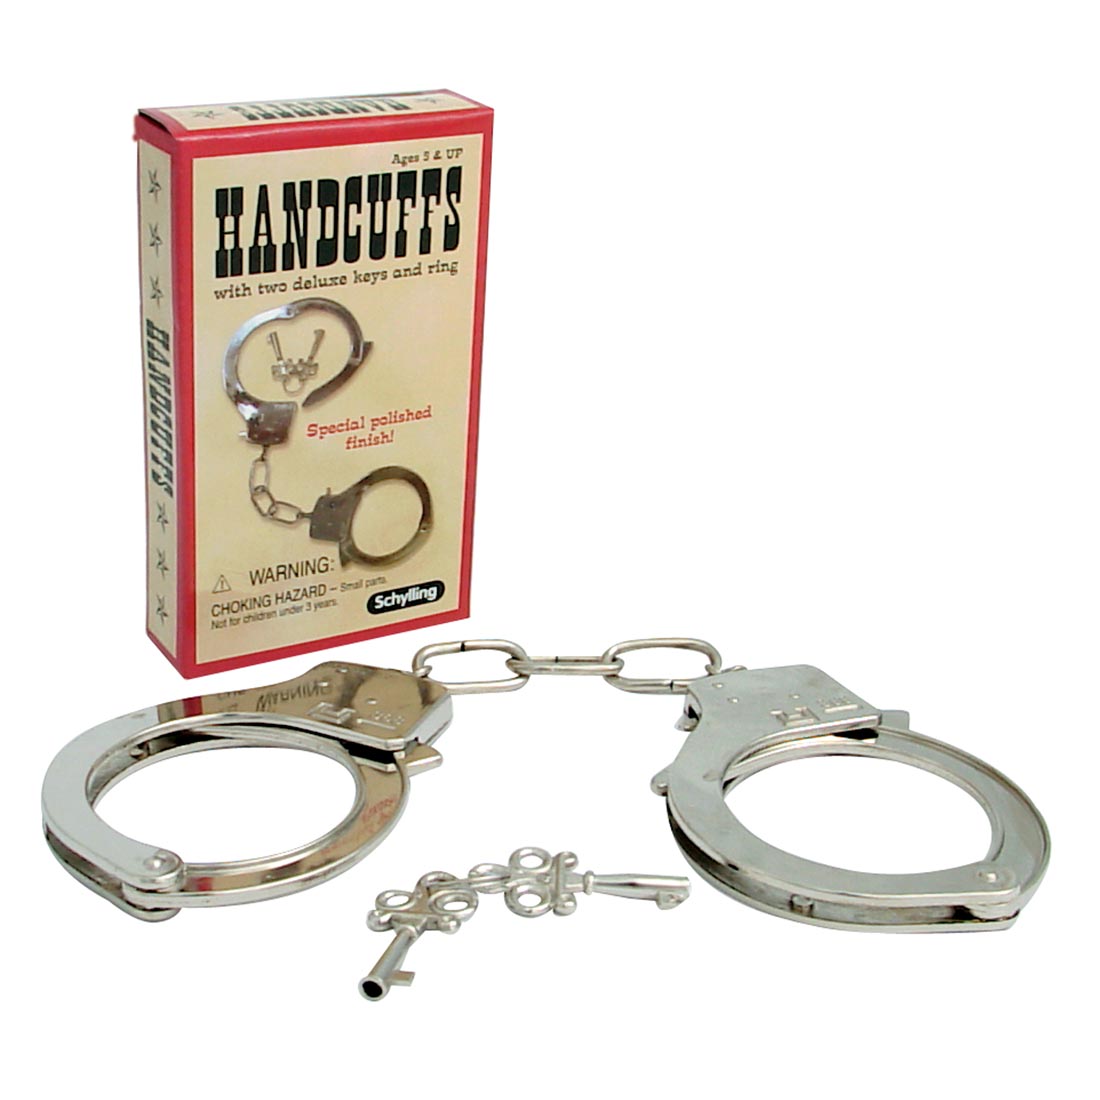 Metal Toy Handcuffs by Schylling with two keys